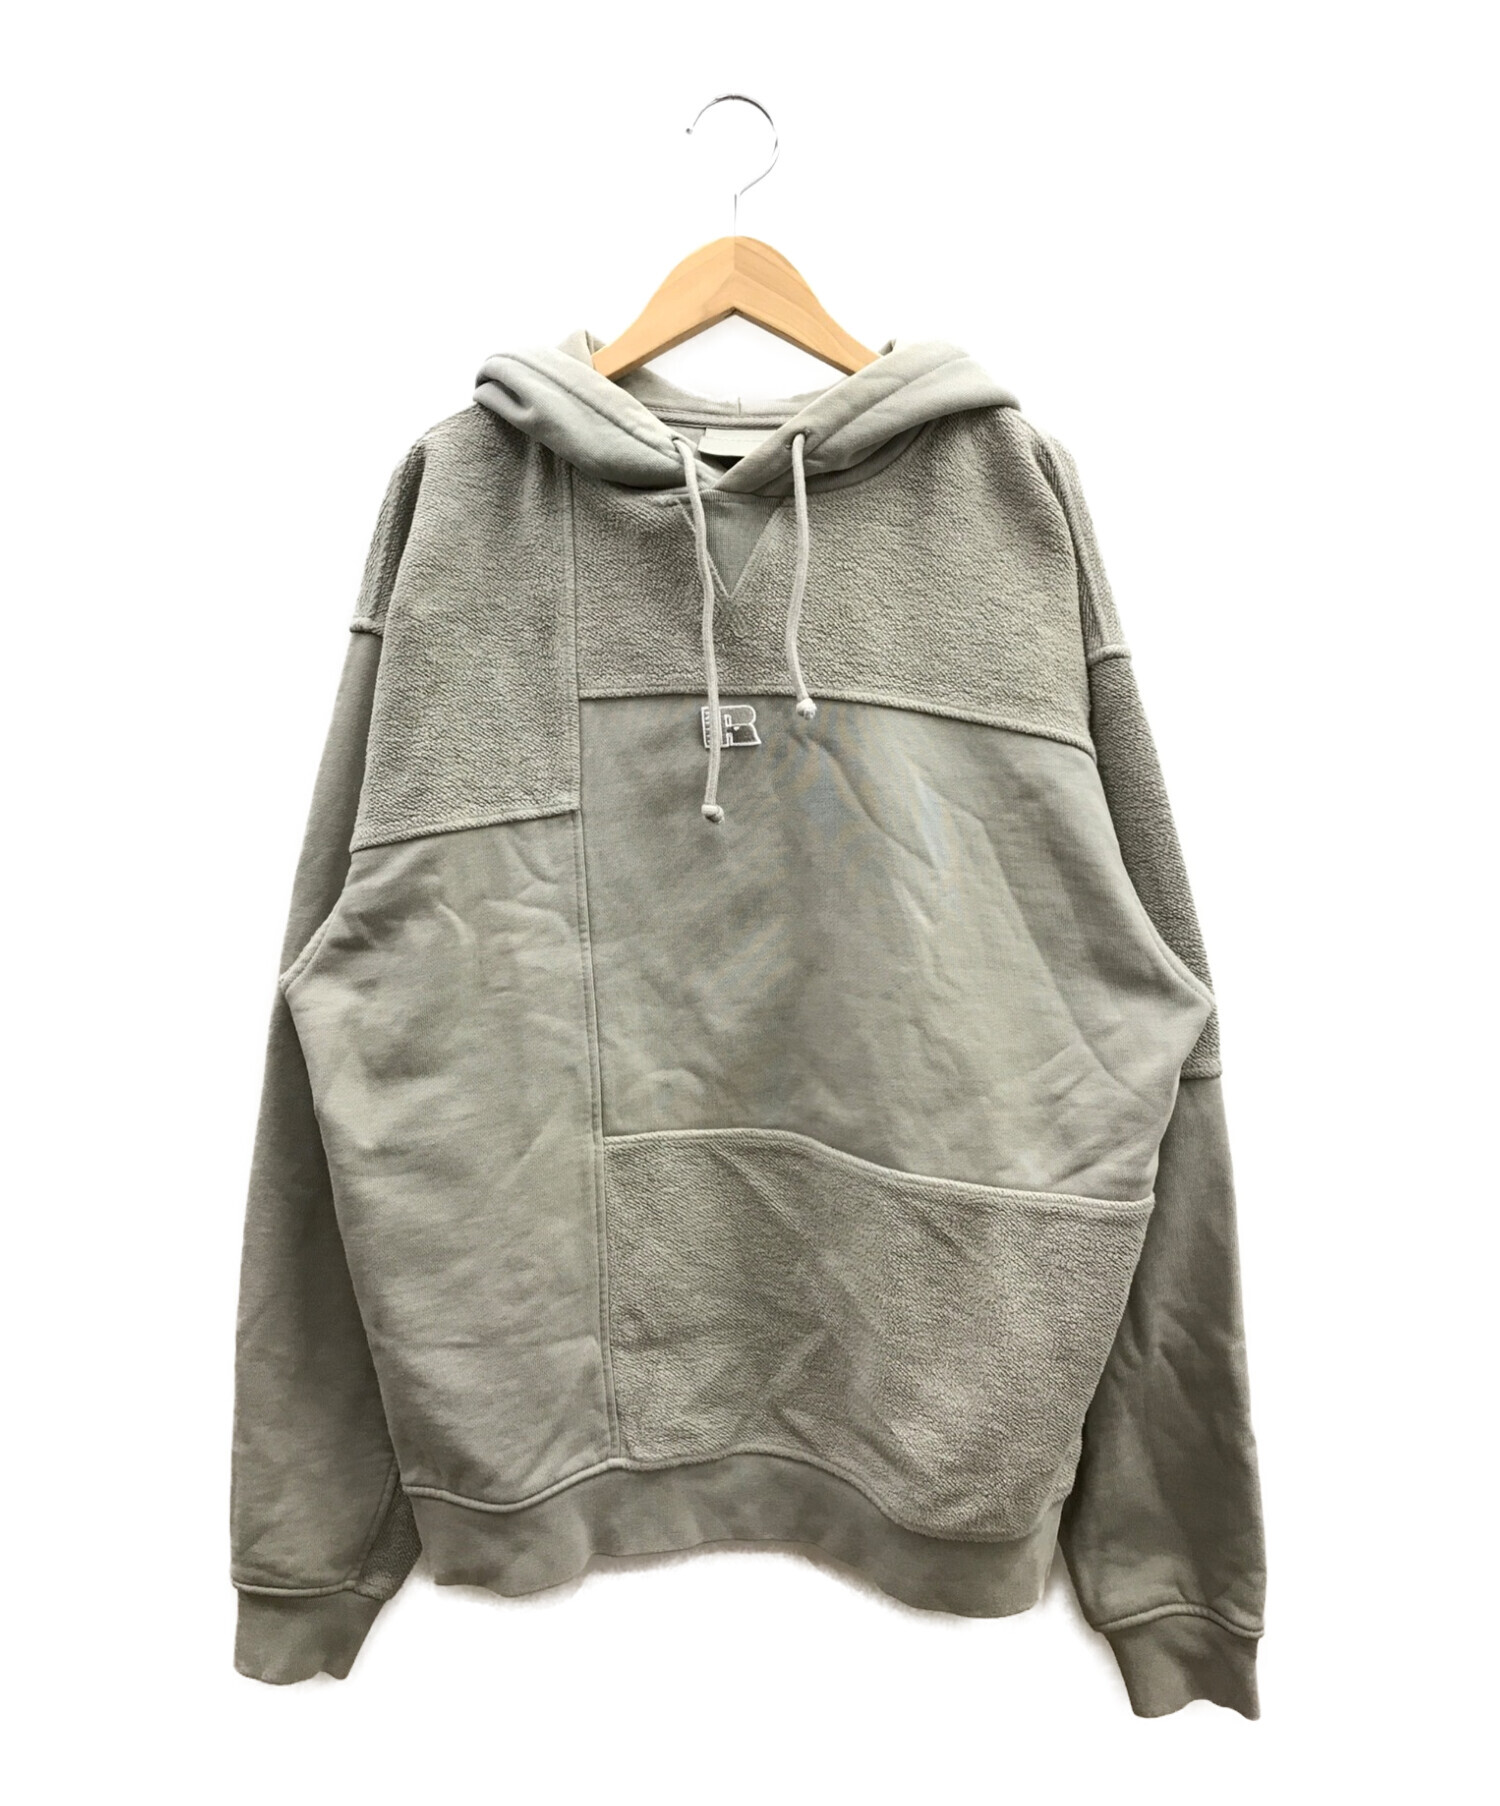 kith russell athletic パーカー フーディ-